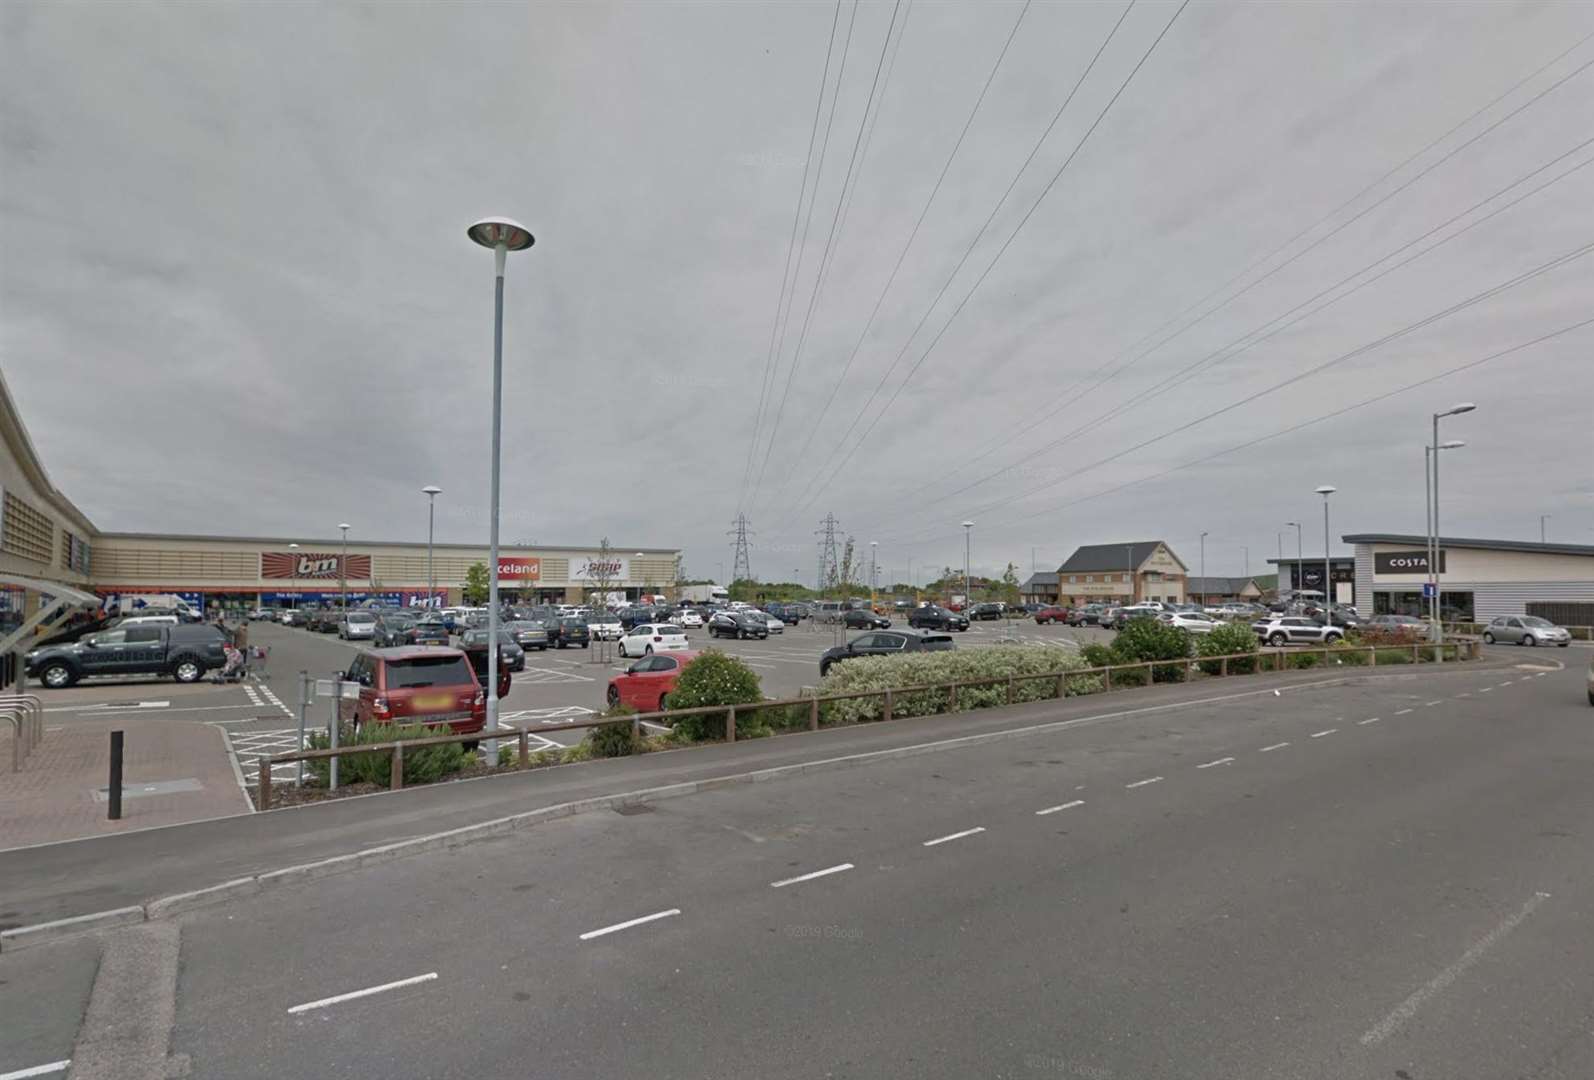 The dispersal order will be in place at Neats Court Retail Park. Picture: Google maps